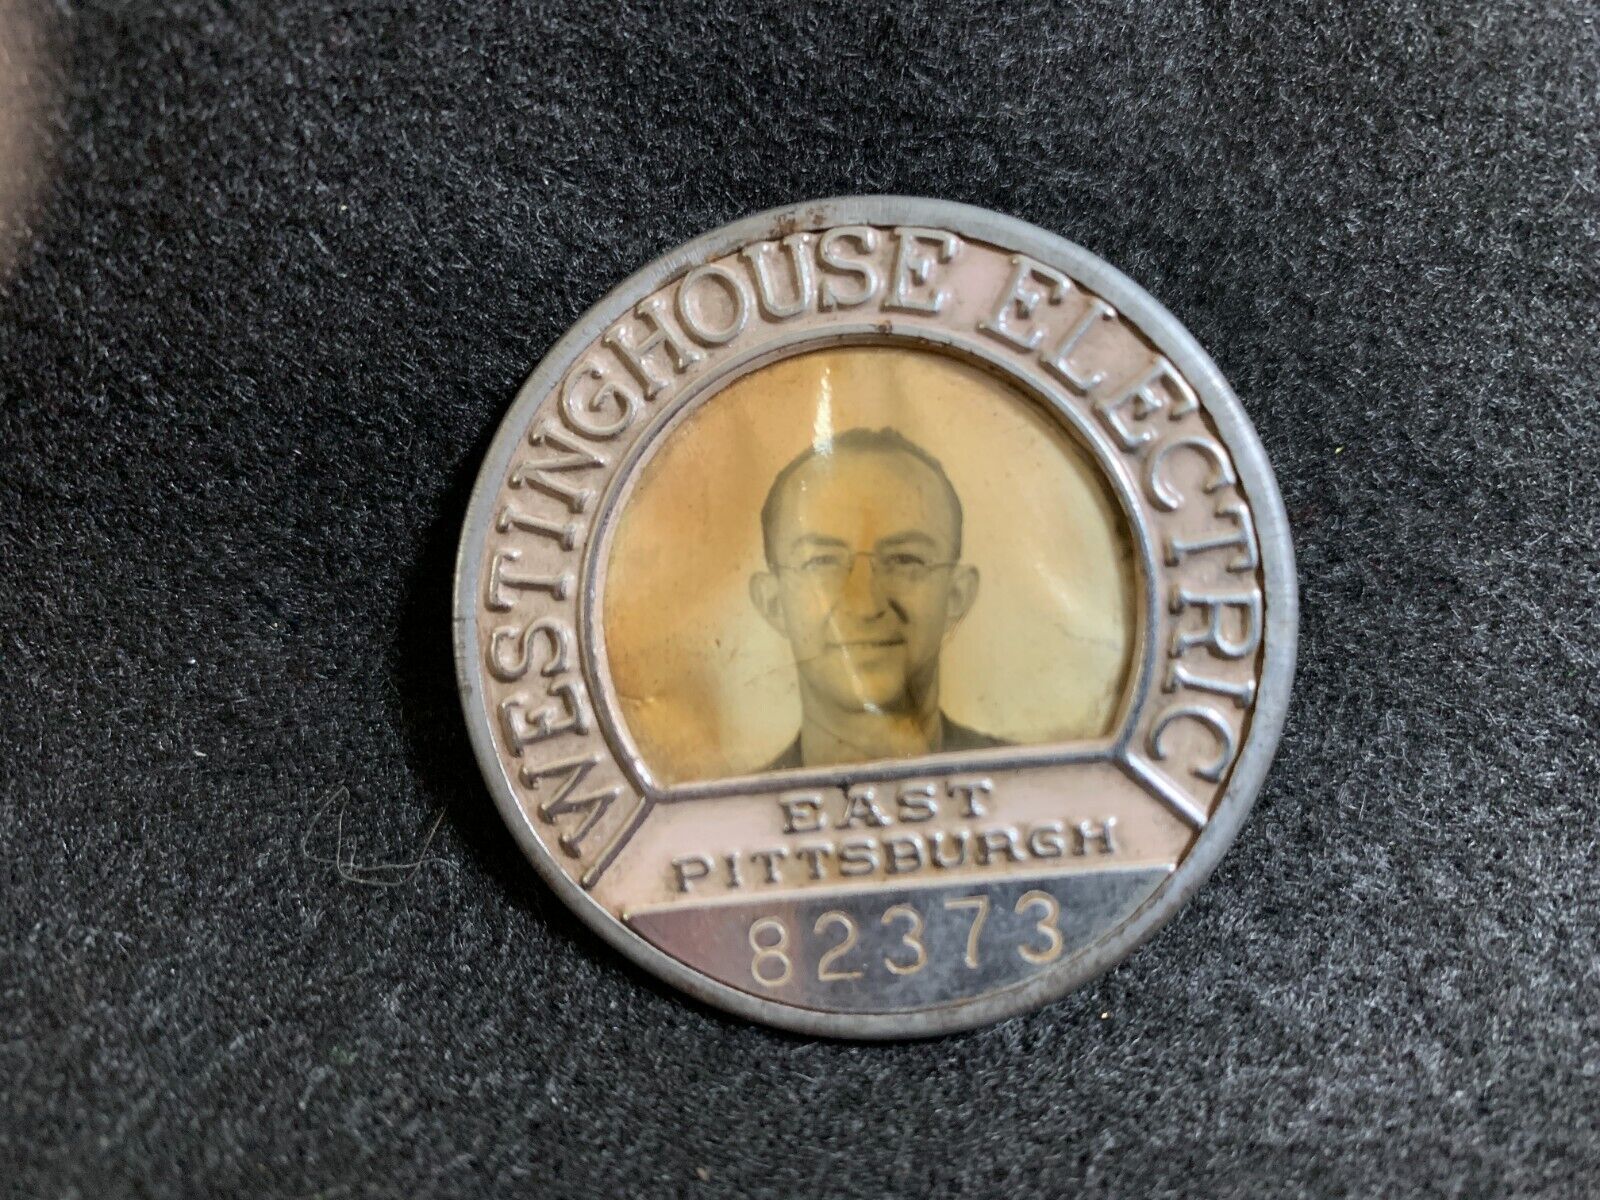 Vintage Westinghouse Electric Employee Pass Badge #82373, East Pittsburgh